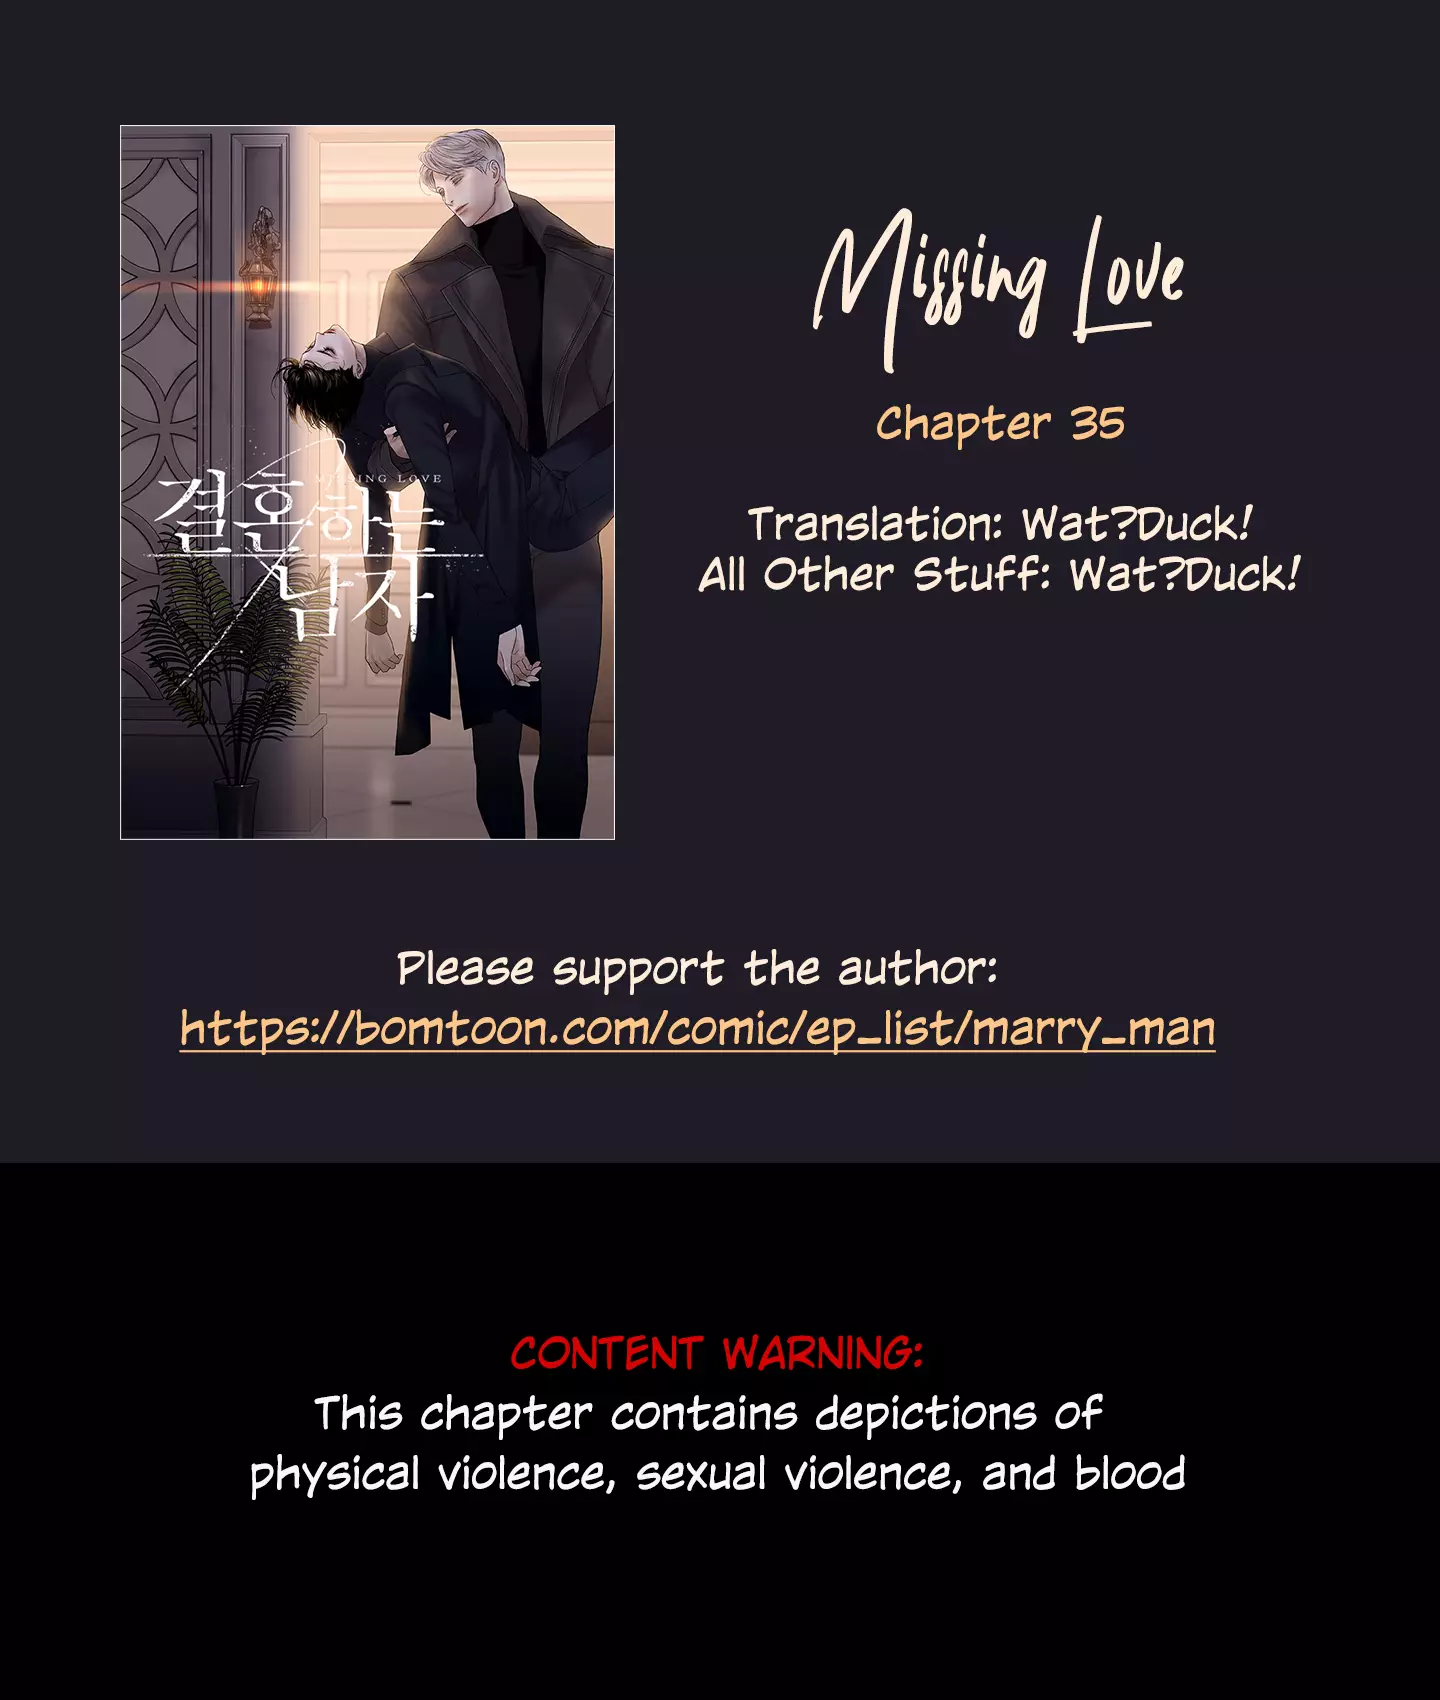 Missing Love: A Married Man - 35 page 1-e9a1e088